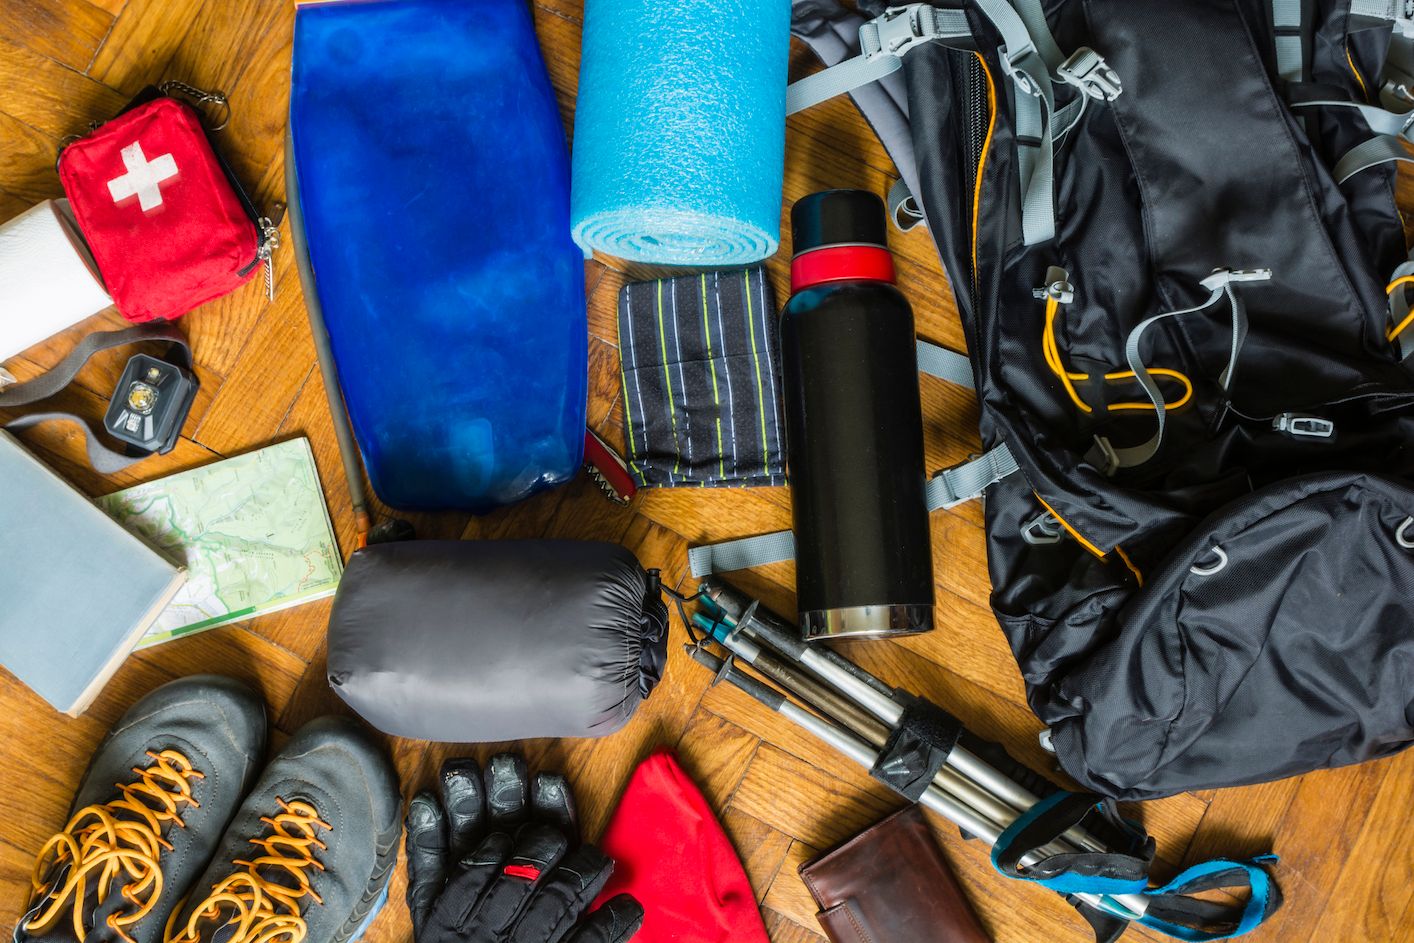 The Top 10 Wilderness Survival Items You Should Always Bring Along